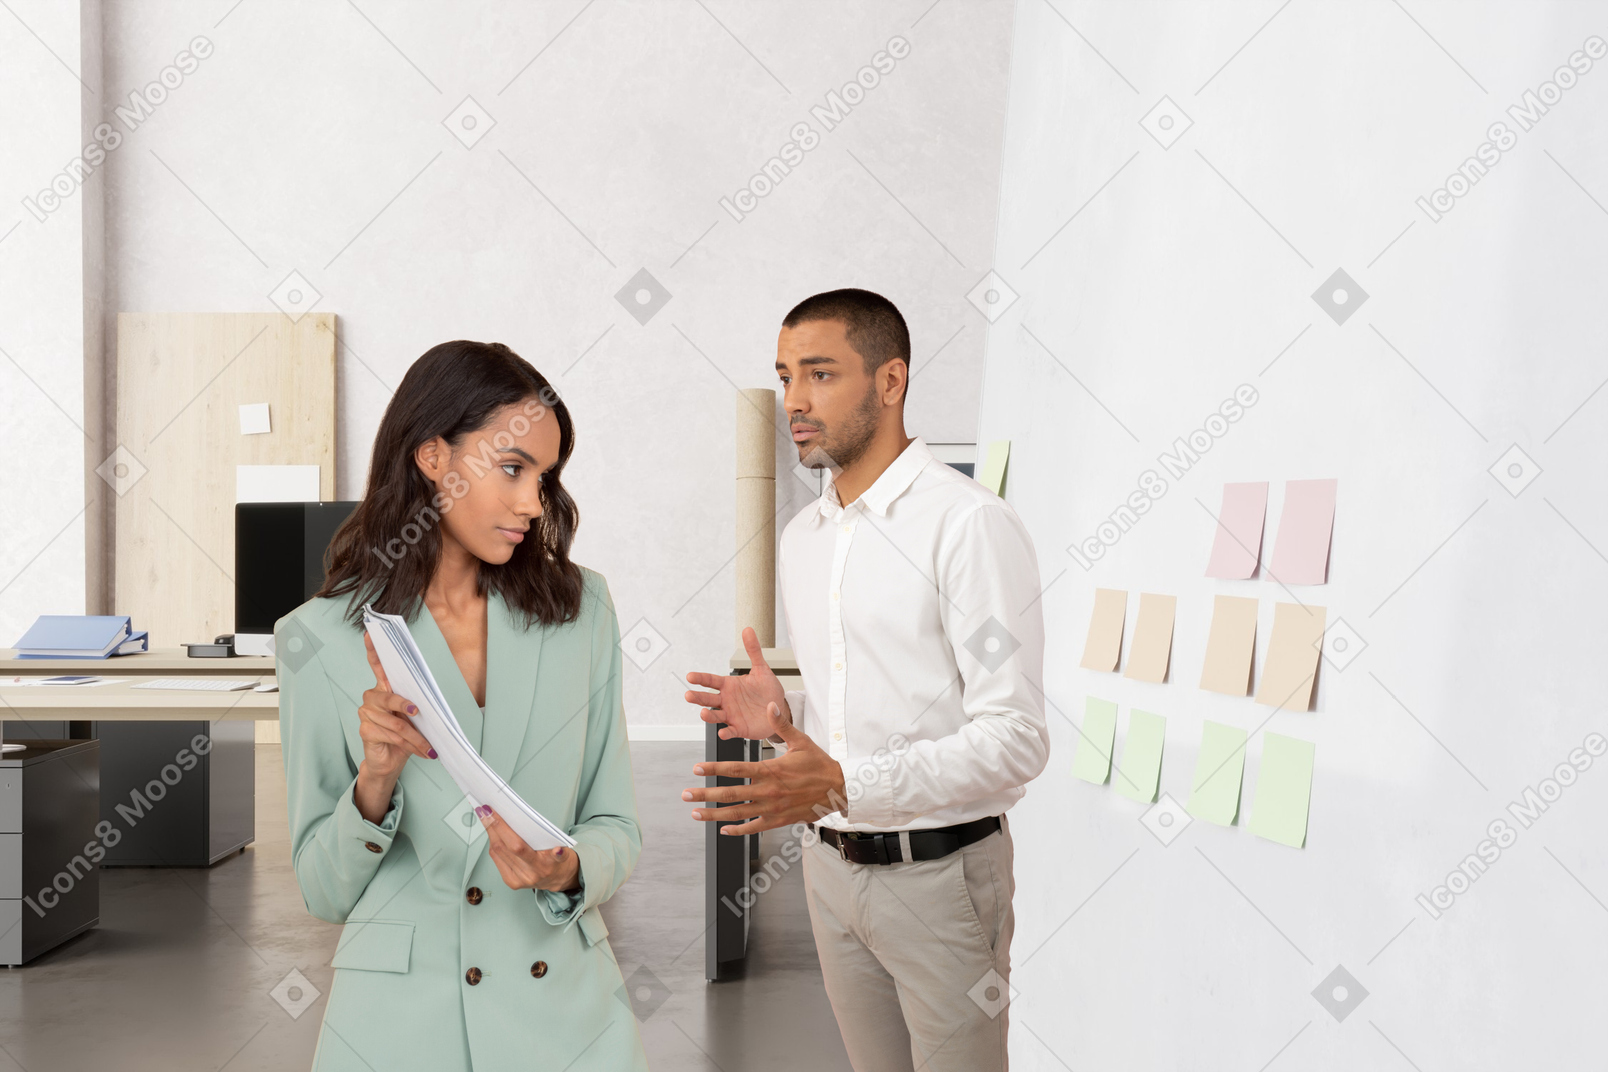 Woman showing report to her colleague